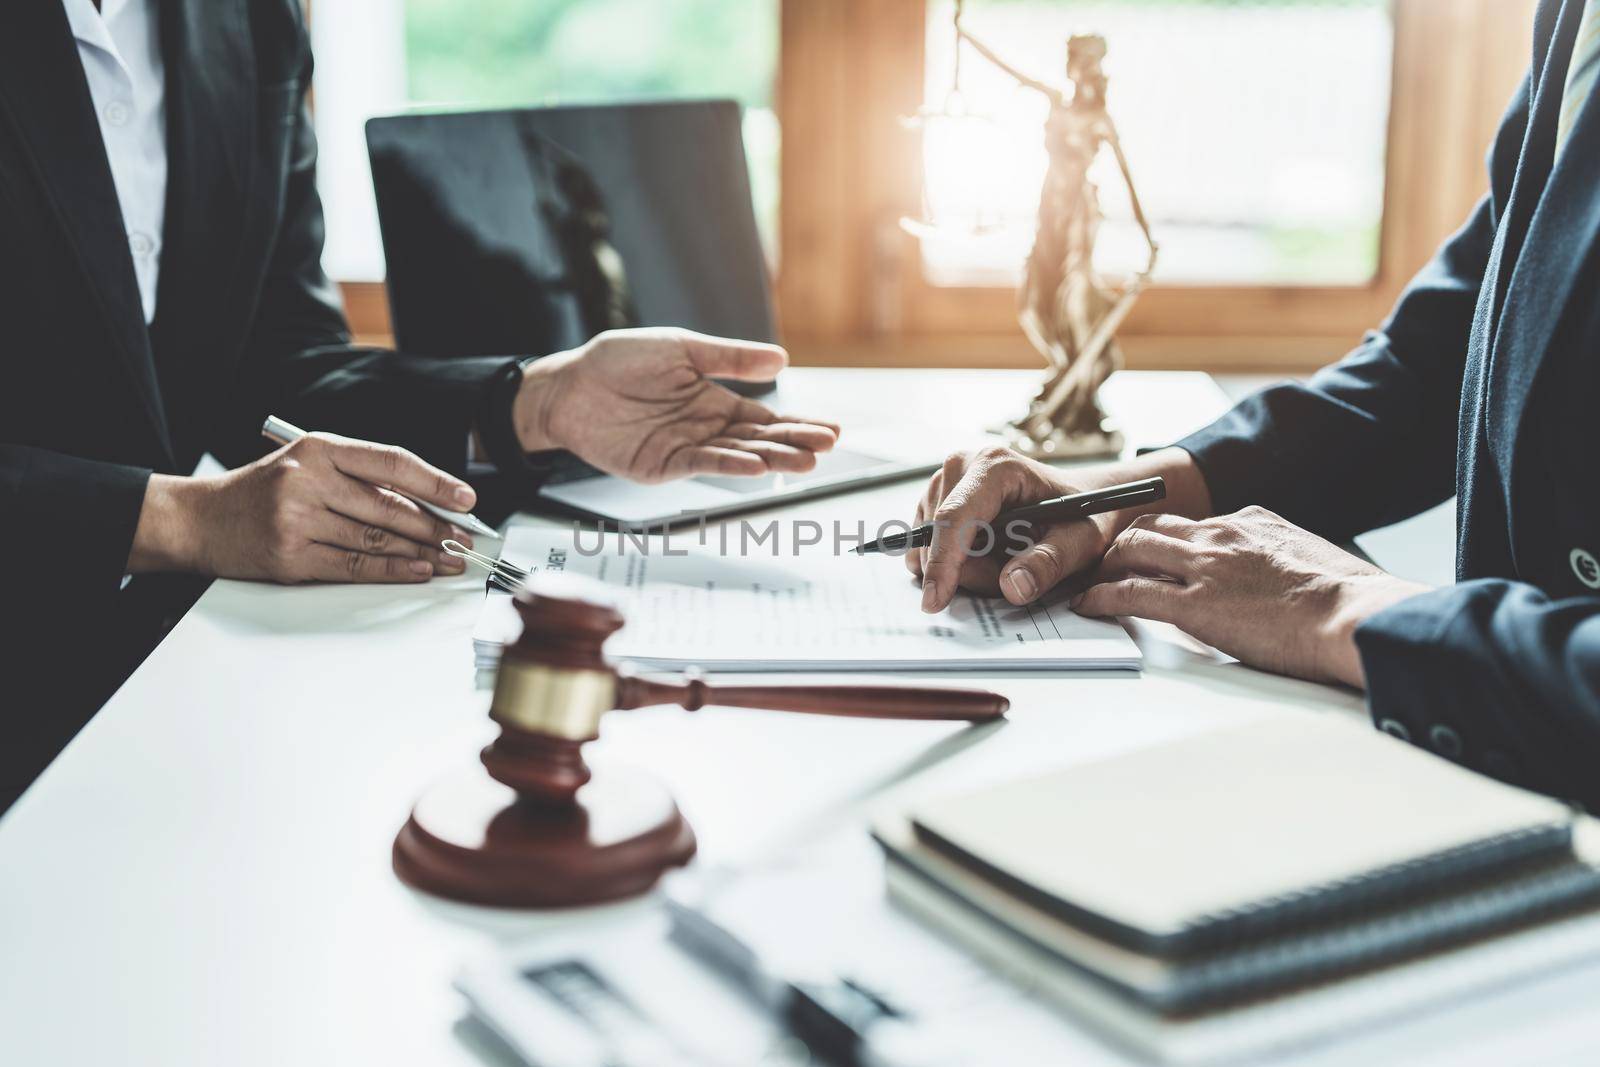 Law, Consultation, Agreement, Contract, Attorney or Lawyer holding a pen is consulting with a client to explain the pattern of answering questions before going to court to decide a lawsuit